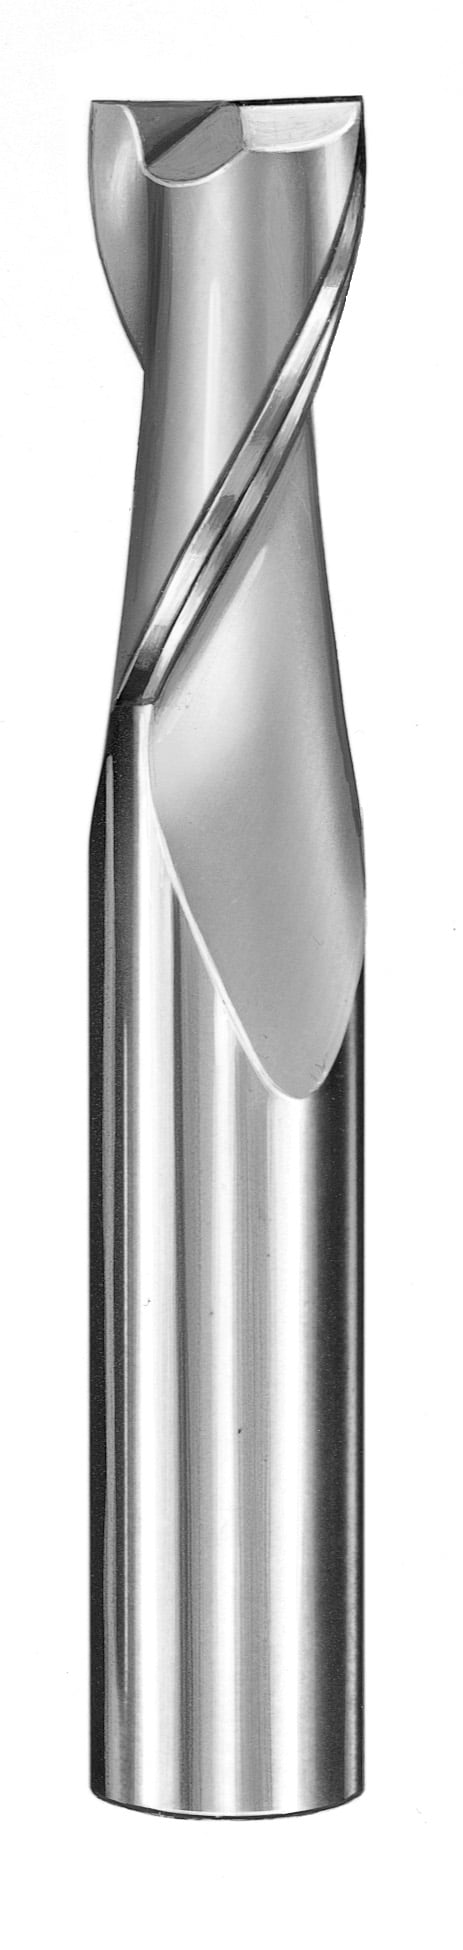 7/16" Dia, 2 Flute, Square End End Mill - 30355